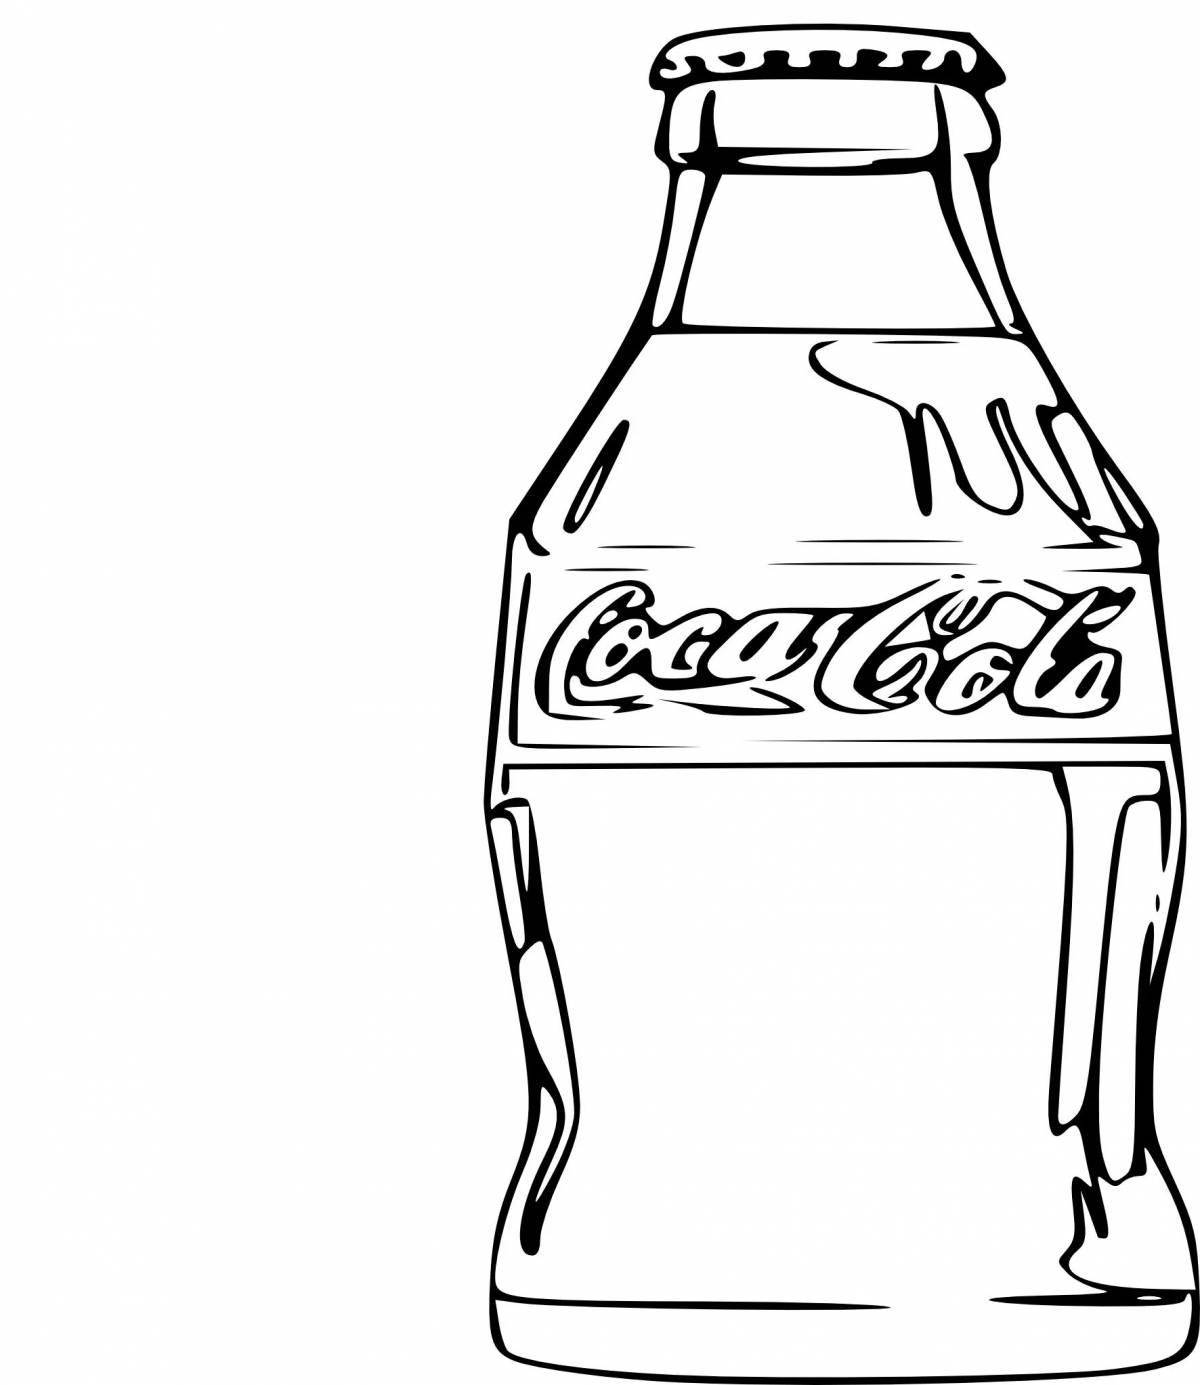 Amazing cola and chips coloring page